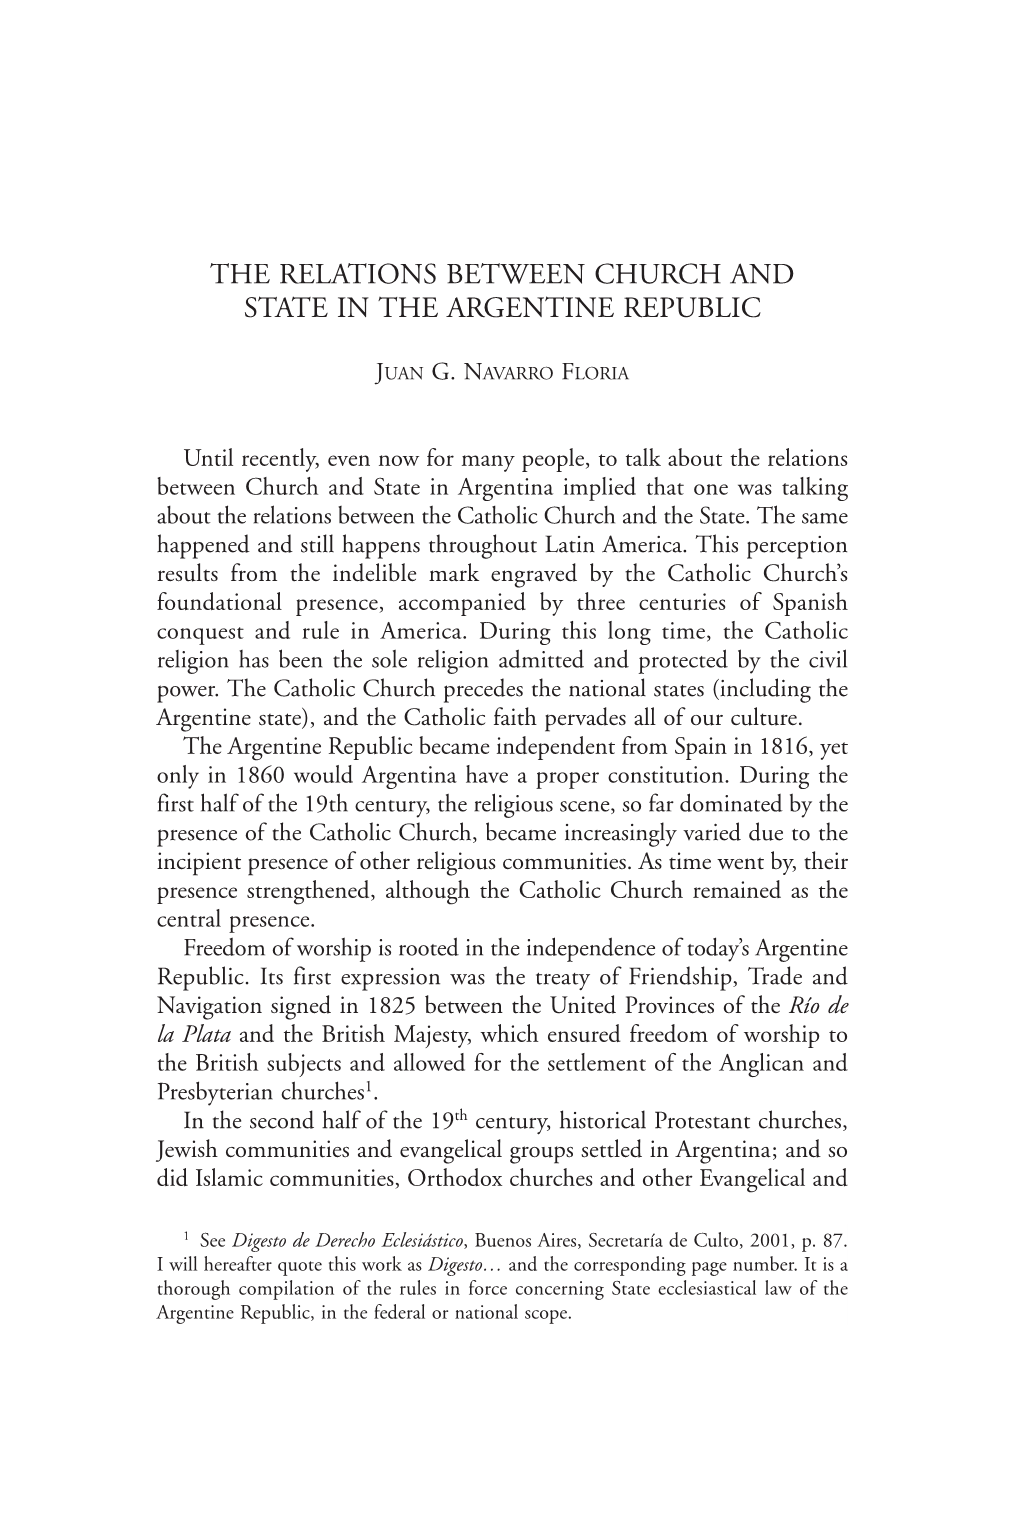 The Relations Between Church and State in the Argentine Republic